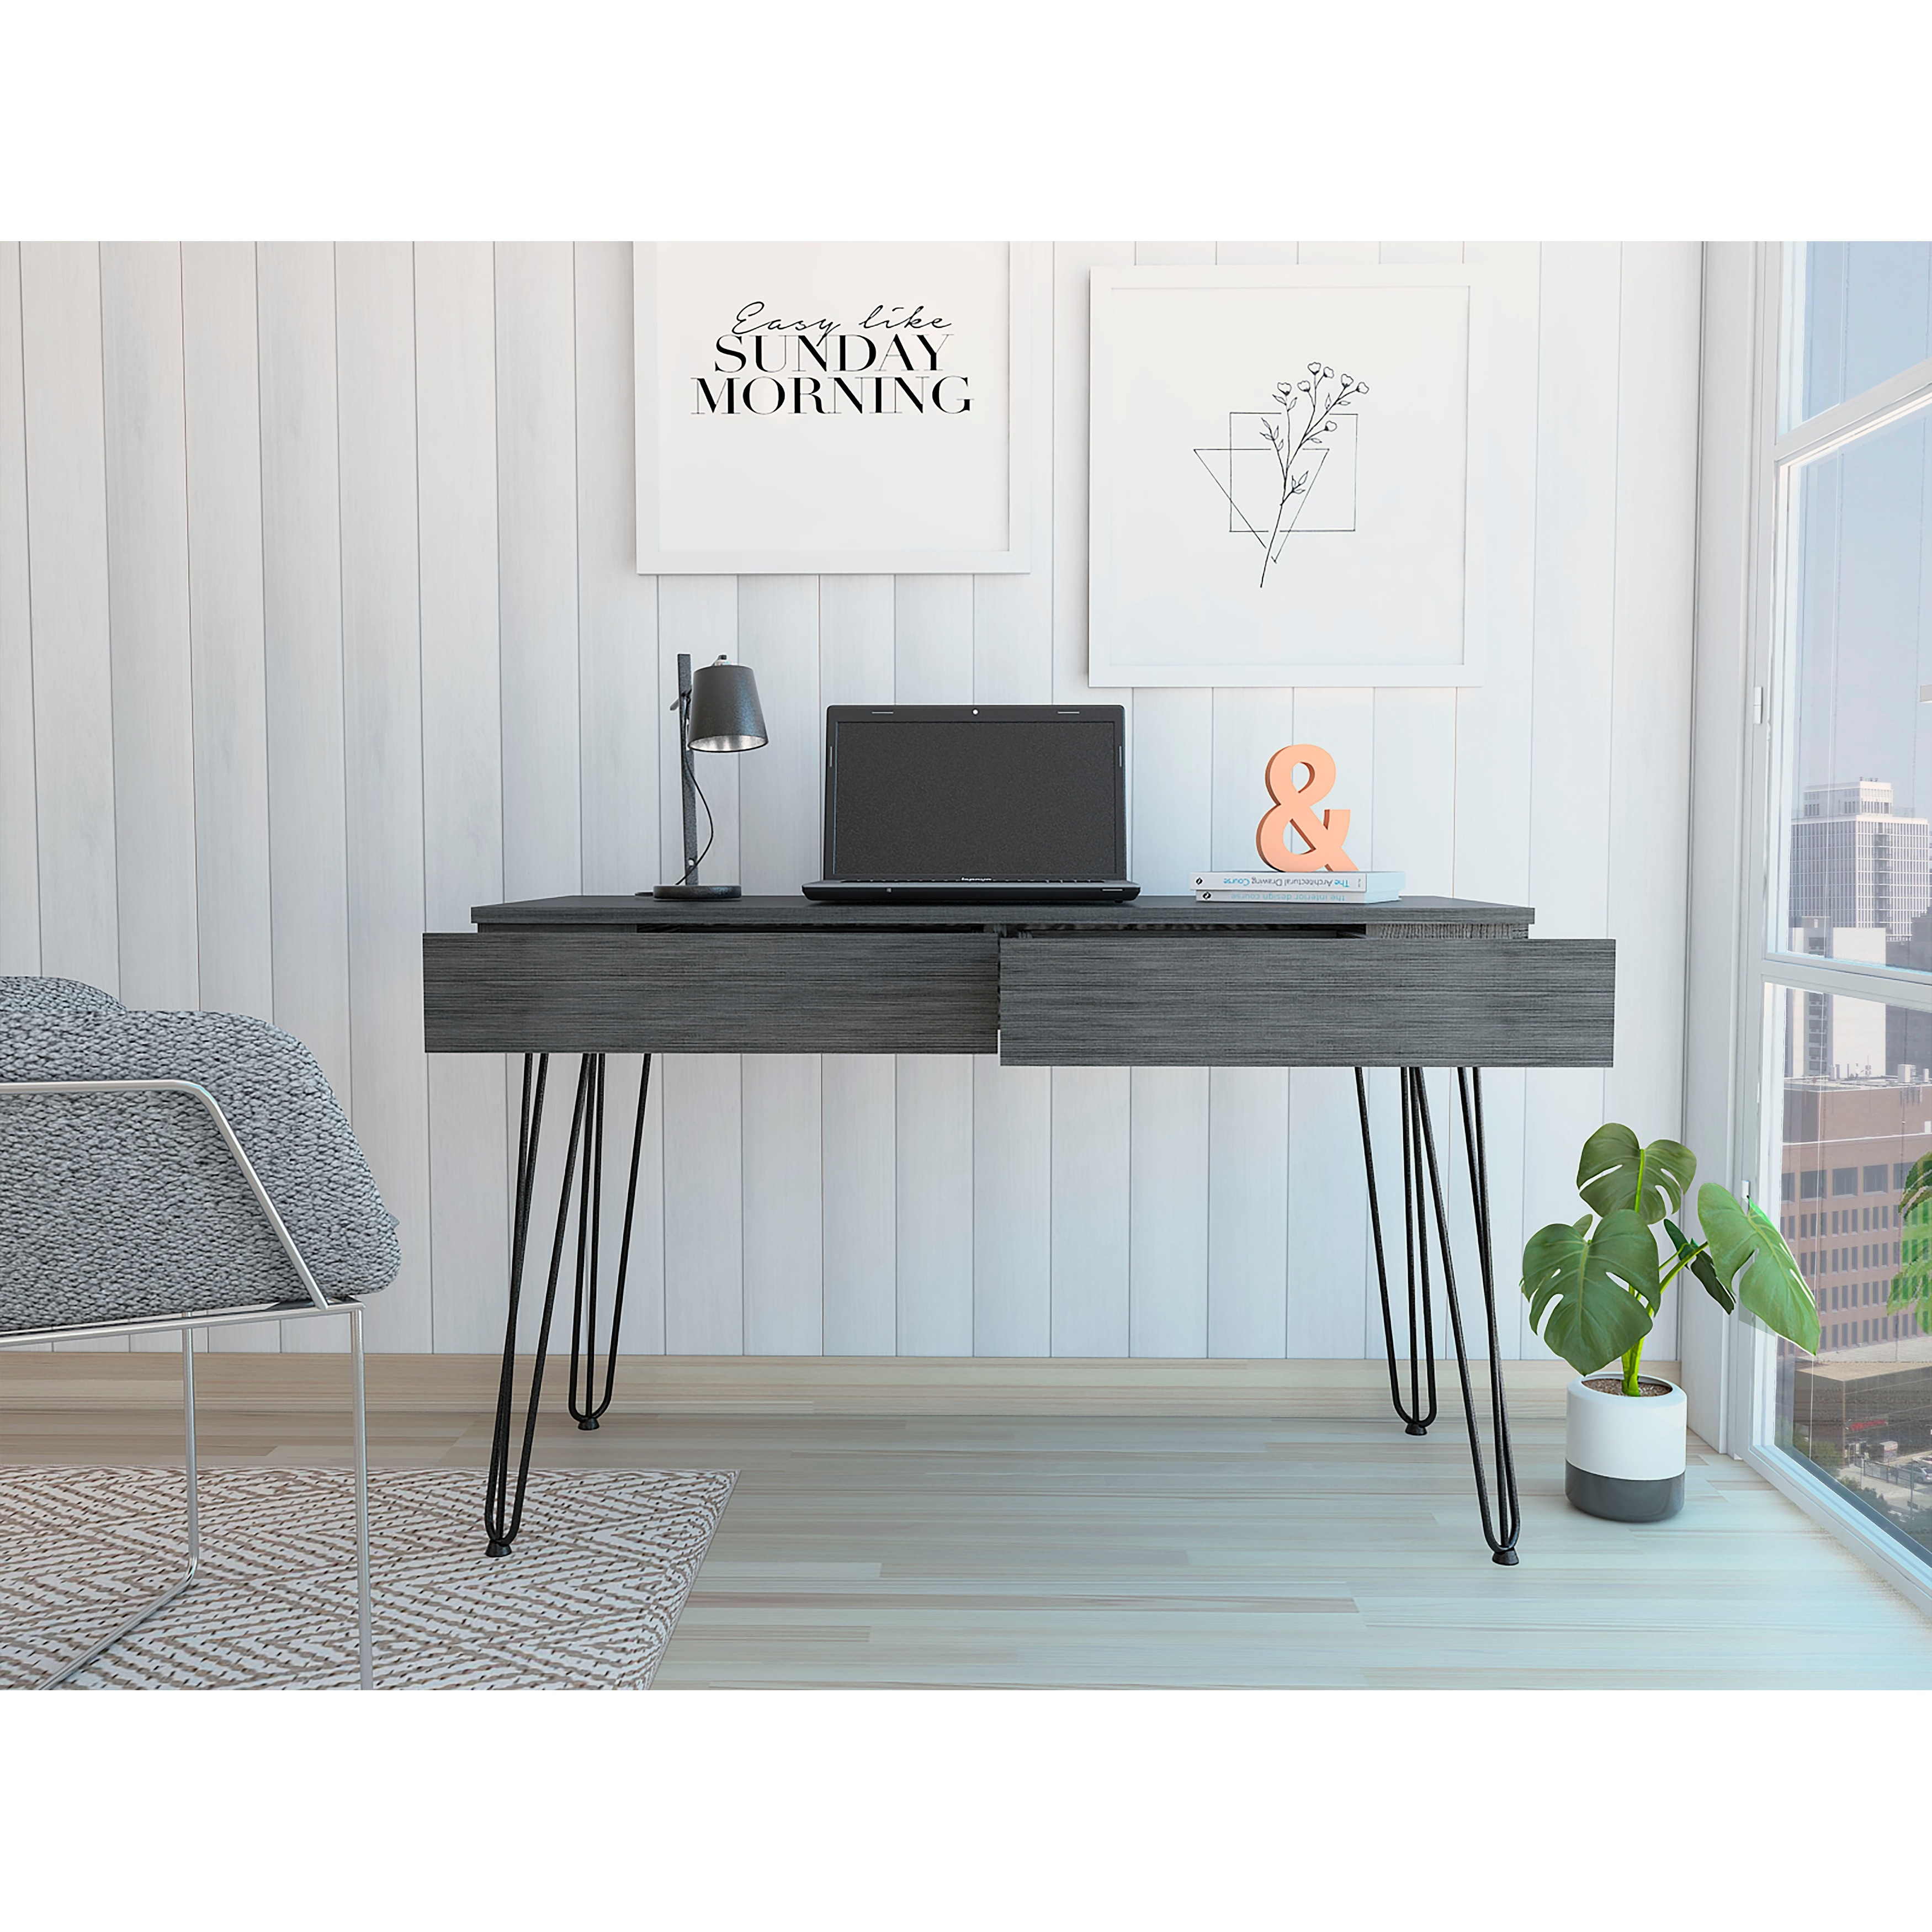 https://ak1.ostkcdn.com/images/products/is/images/direct/30997d8f2bca245c32511c40be790c5bb83575e8/Modern-Computer-Desk-with-2-Storage-Drawers%2C-47-inch-Home-Office-Writing-Desk%2C-Study-Table-for-Small-Space%2C-Grey.jpg